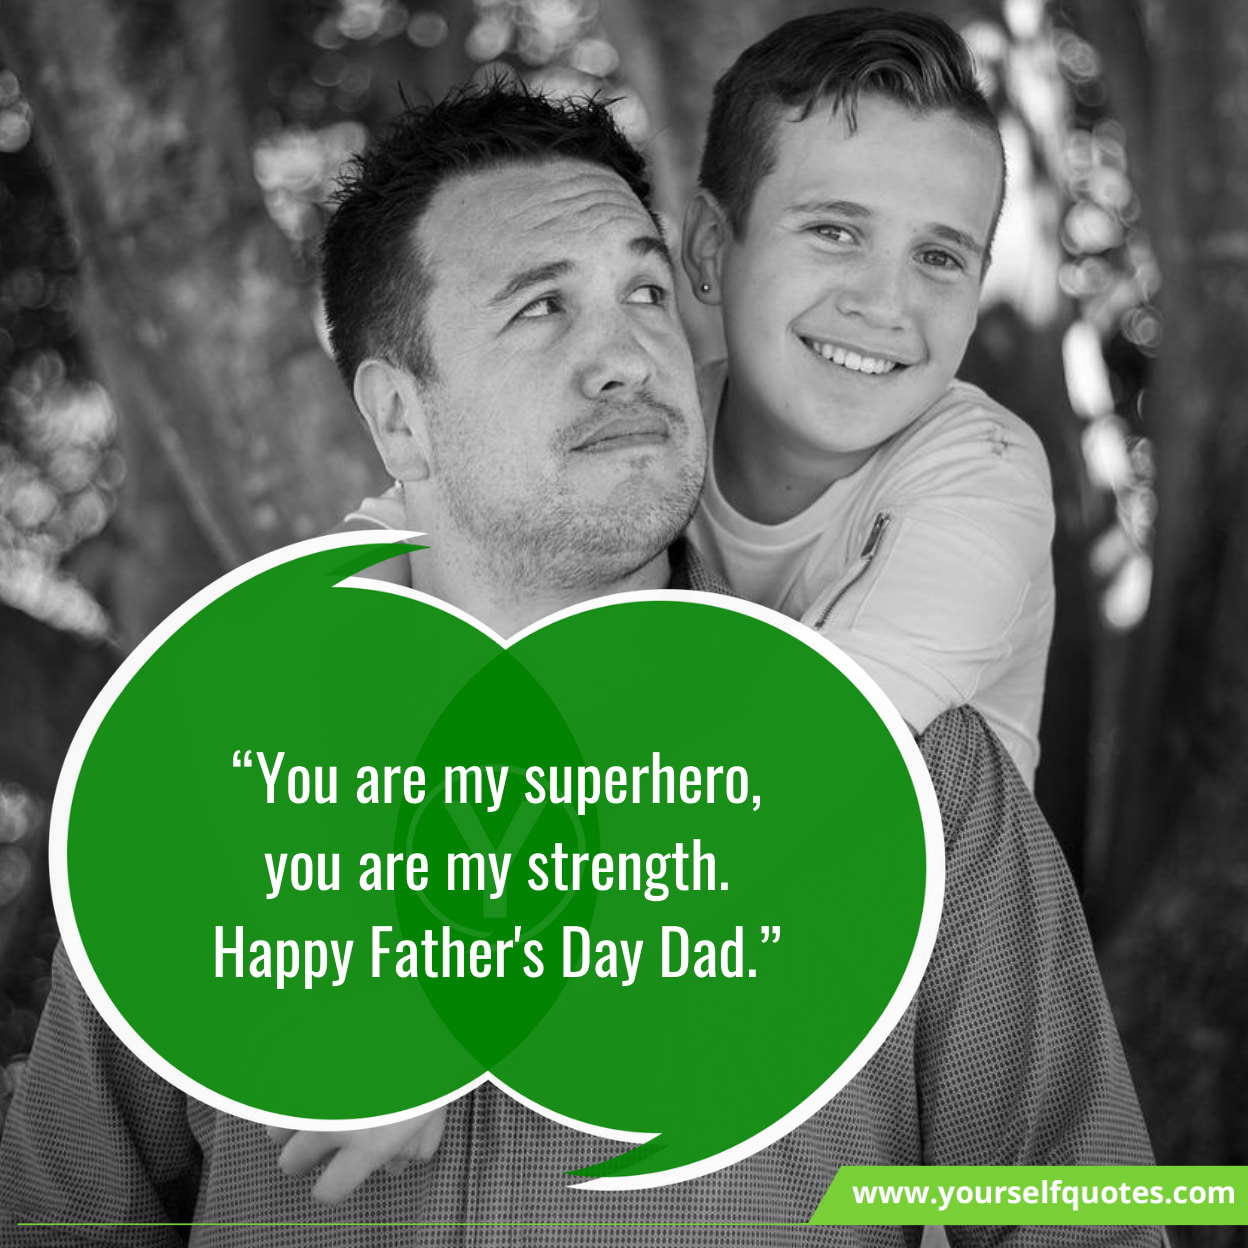 Happy Fathers Day Quotes 2022: Wishes, Messages, Sayings & Greetings